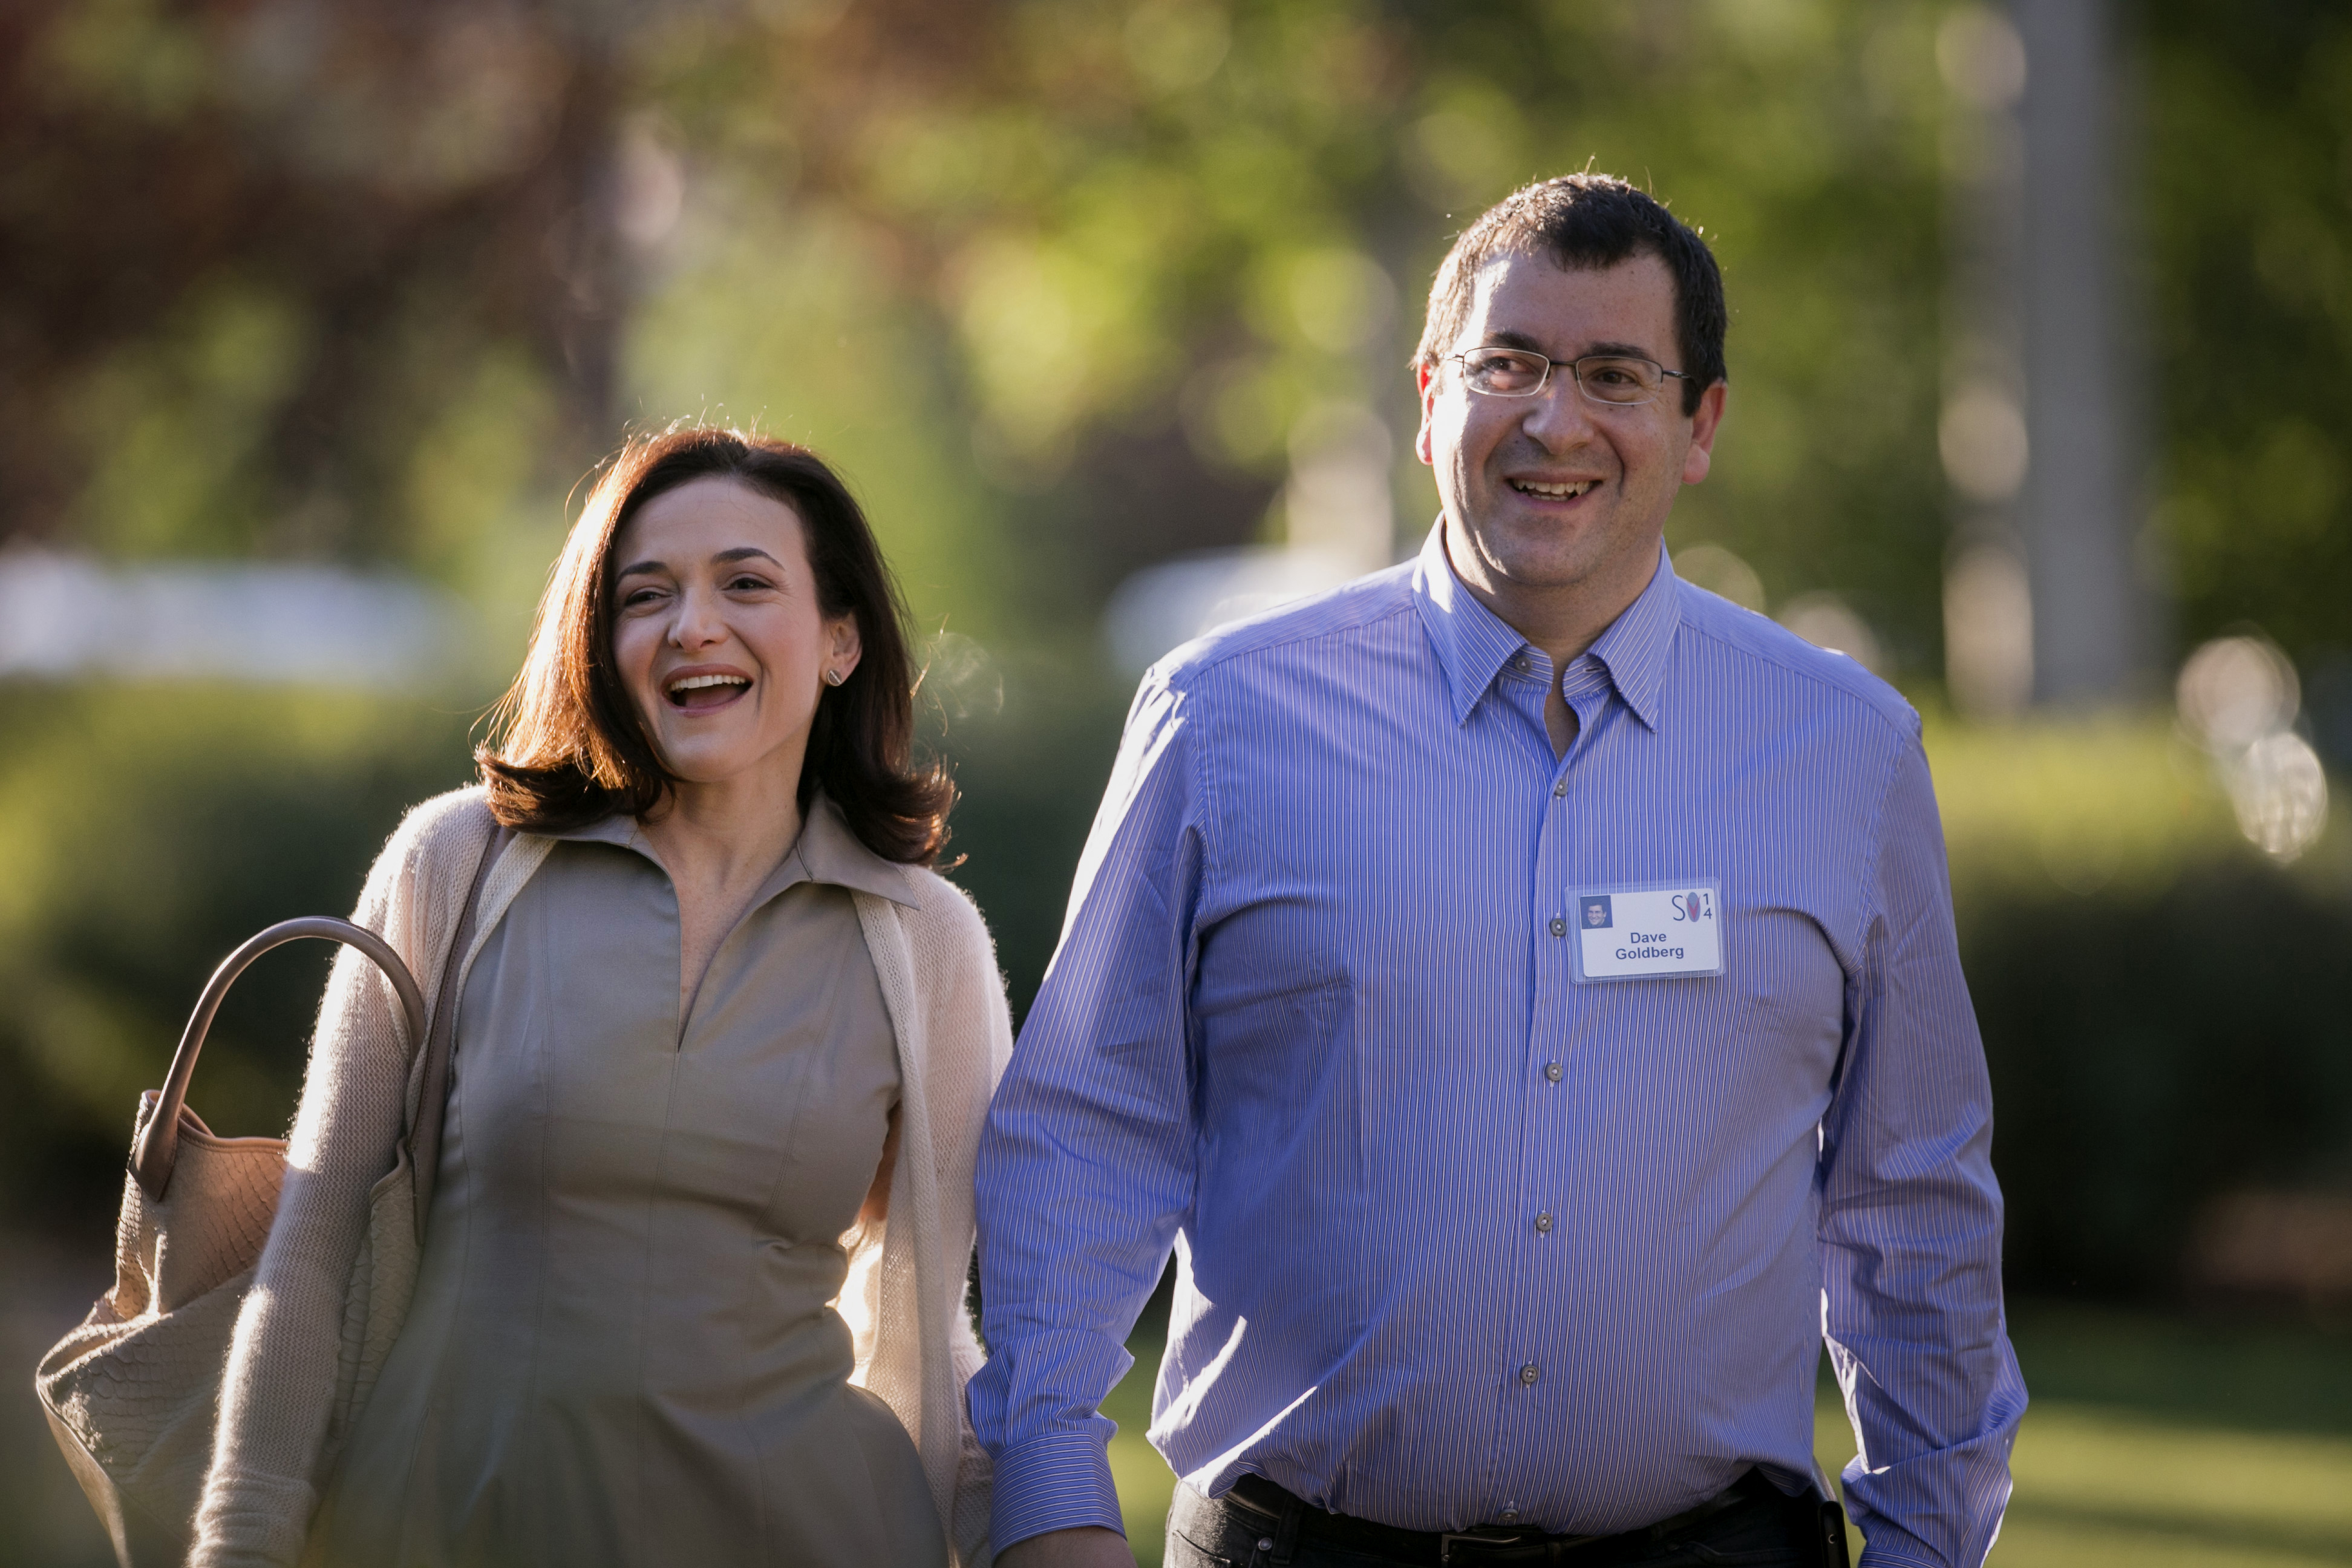 Sheryl Sandberg, chief operating officer of Facebook Inc., left, and her late husband David Goldberg, chief executive officer of SurveyMonkey, arrive to a morning session at the Sun Valley Lodge during the Allen &amp; Co. Media and Technology Conference in Sun Valley, Idaho, on July 9, 2014. (Scott Eells—Bloomberg/Getty Images)